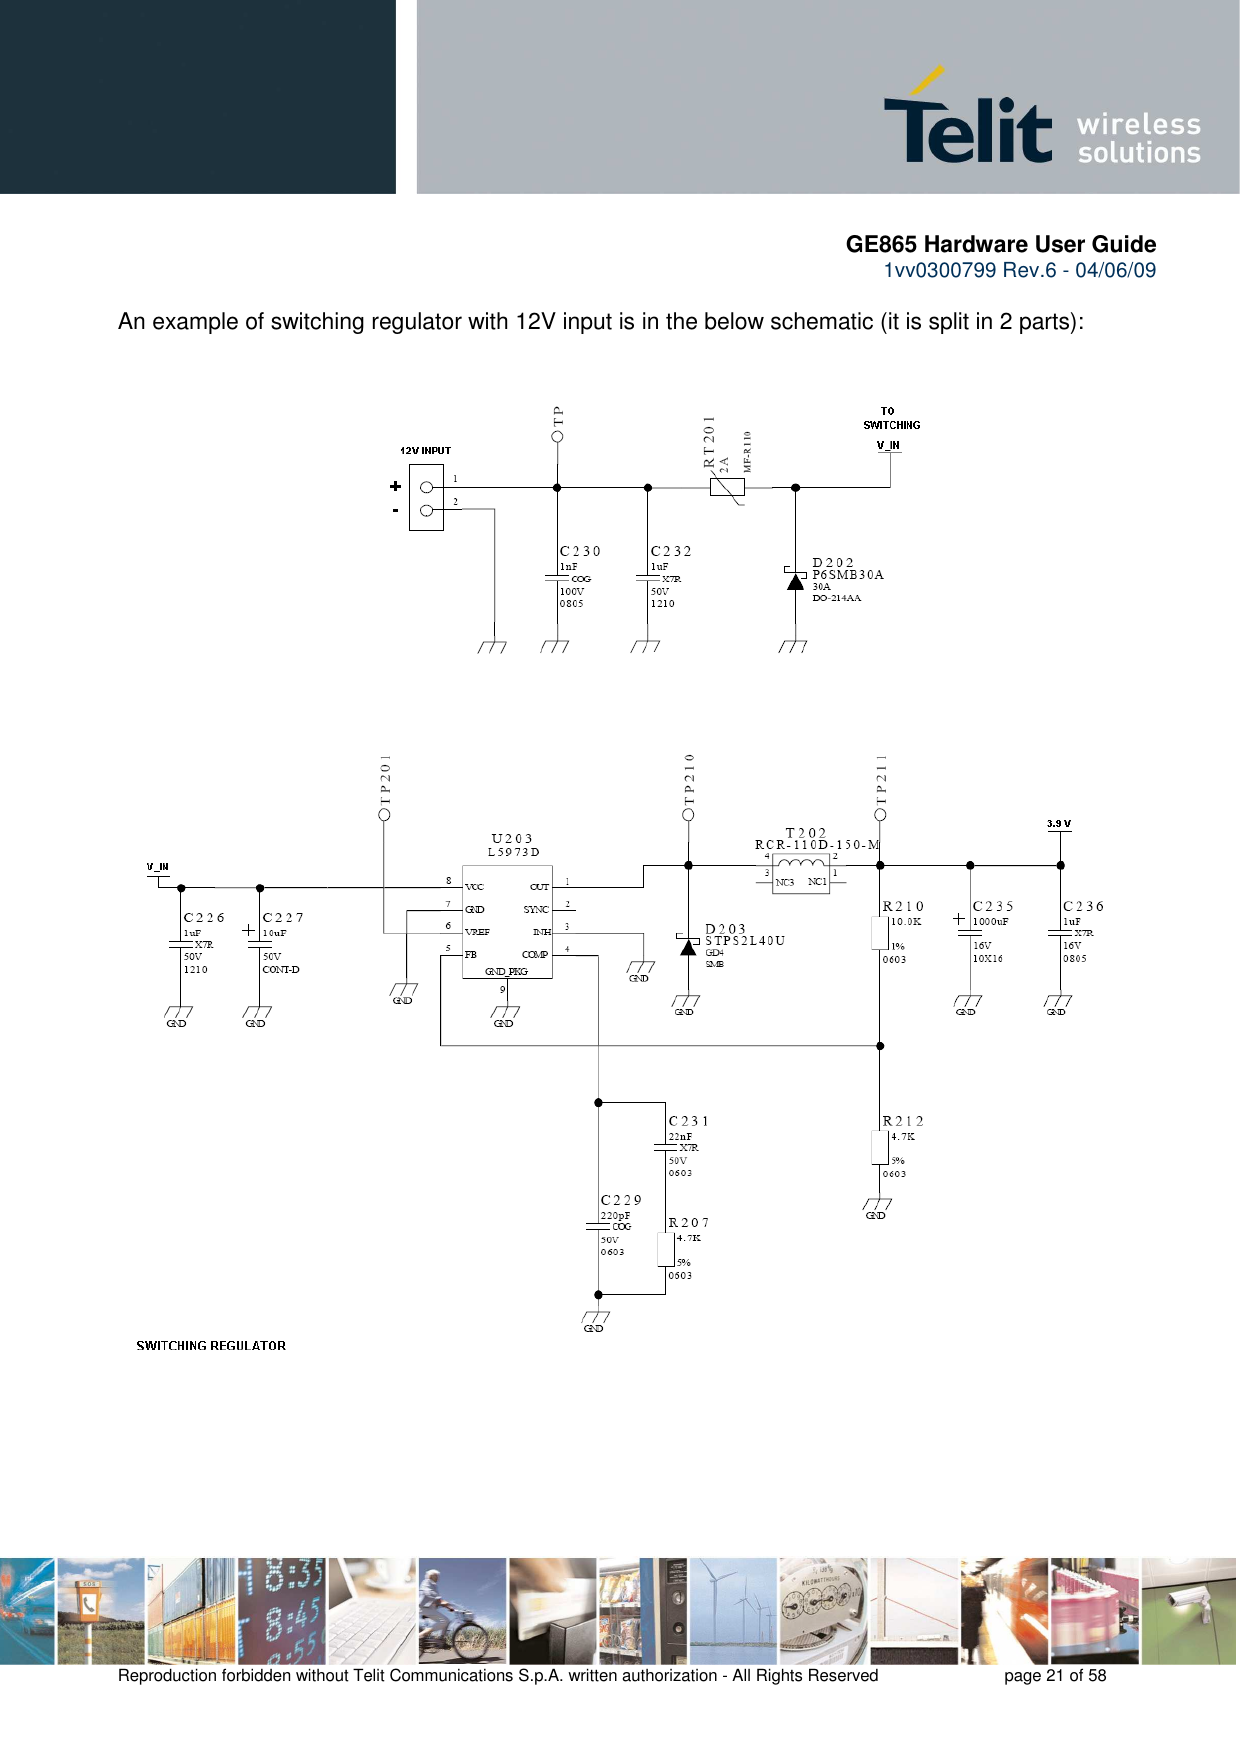       GE865 Hardware User Guide 1vv0300799 Rev.6 - 04/06/09      Reproduction forbidden without Telit Communications S.p.A. written authorization - All Rights Reserved    page 21 of 58   An example of switching regulator with 12V input is in the below schematic (it is split in 2 parts):          